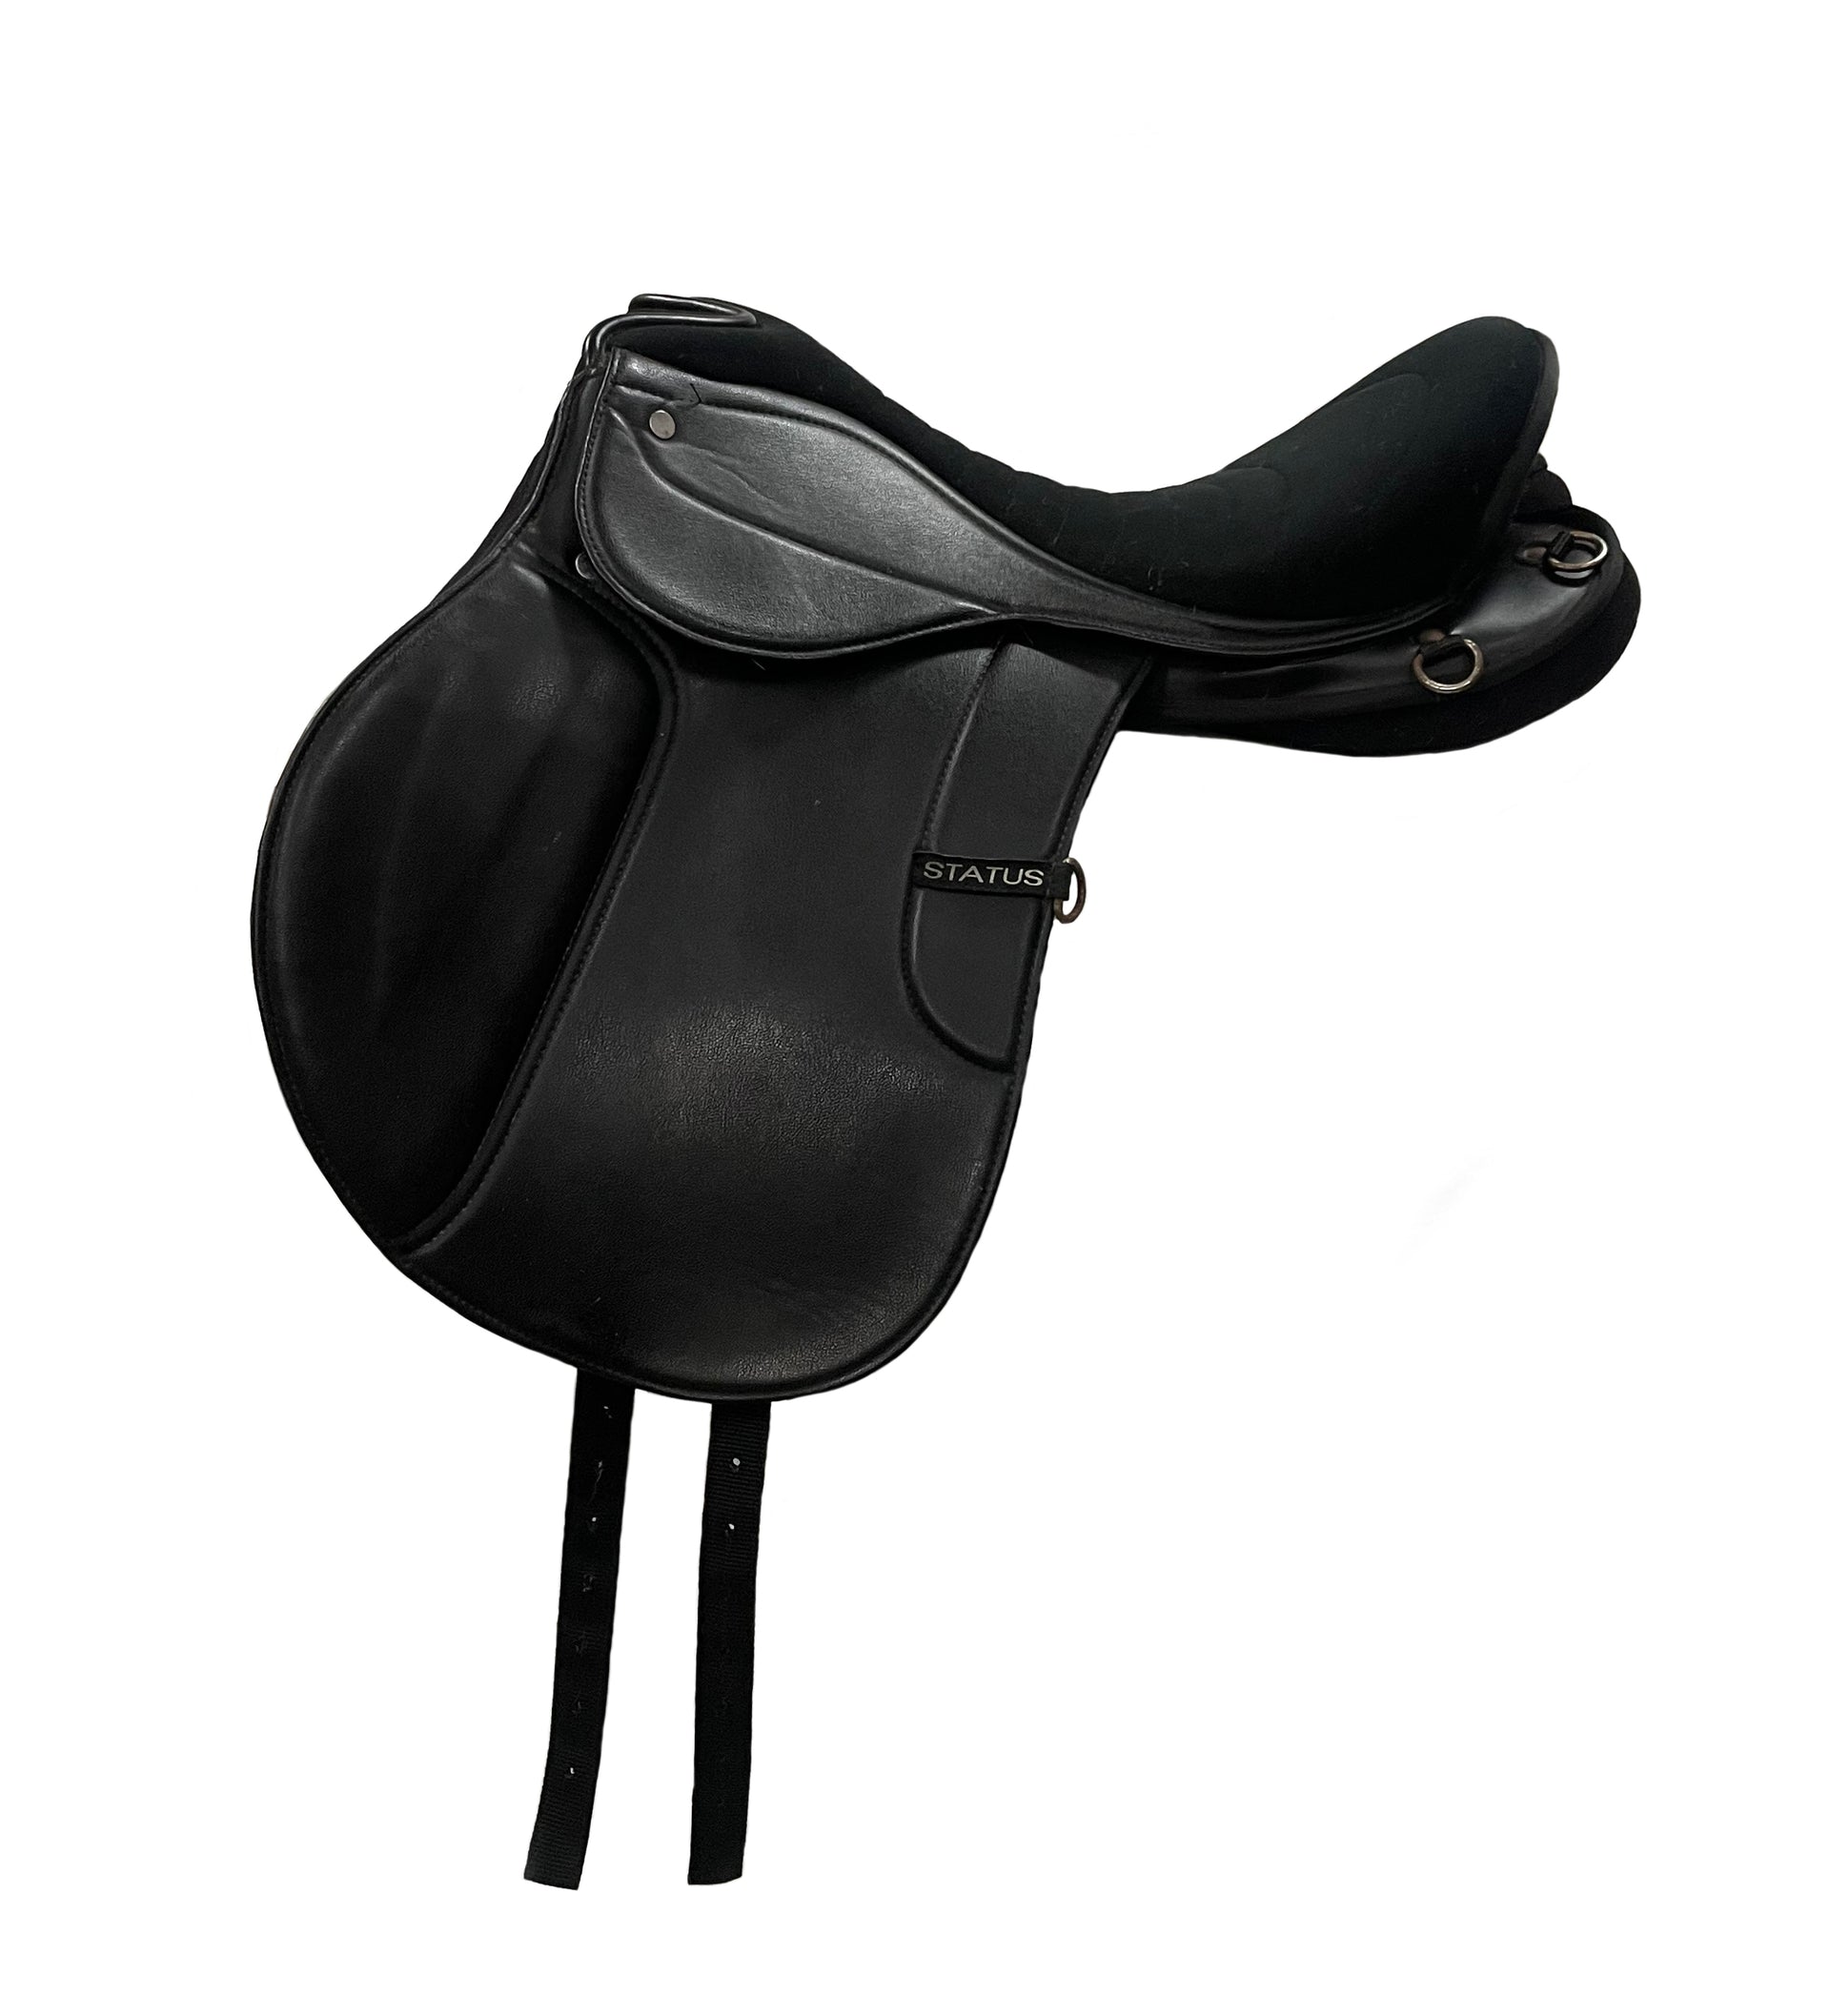 Status Endurance Saddle 17" Second Hand - The Trading Stables